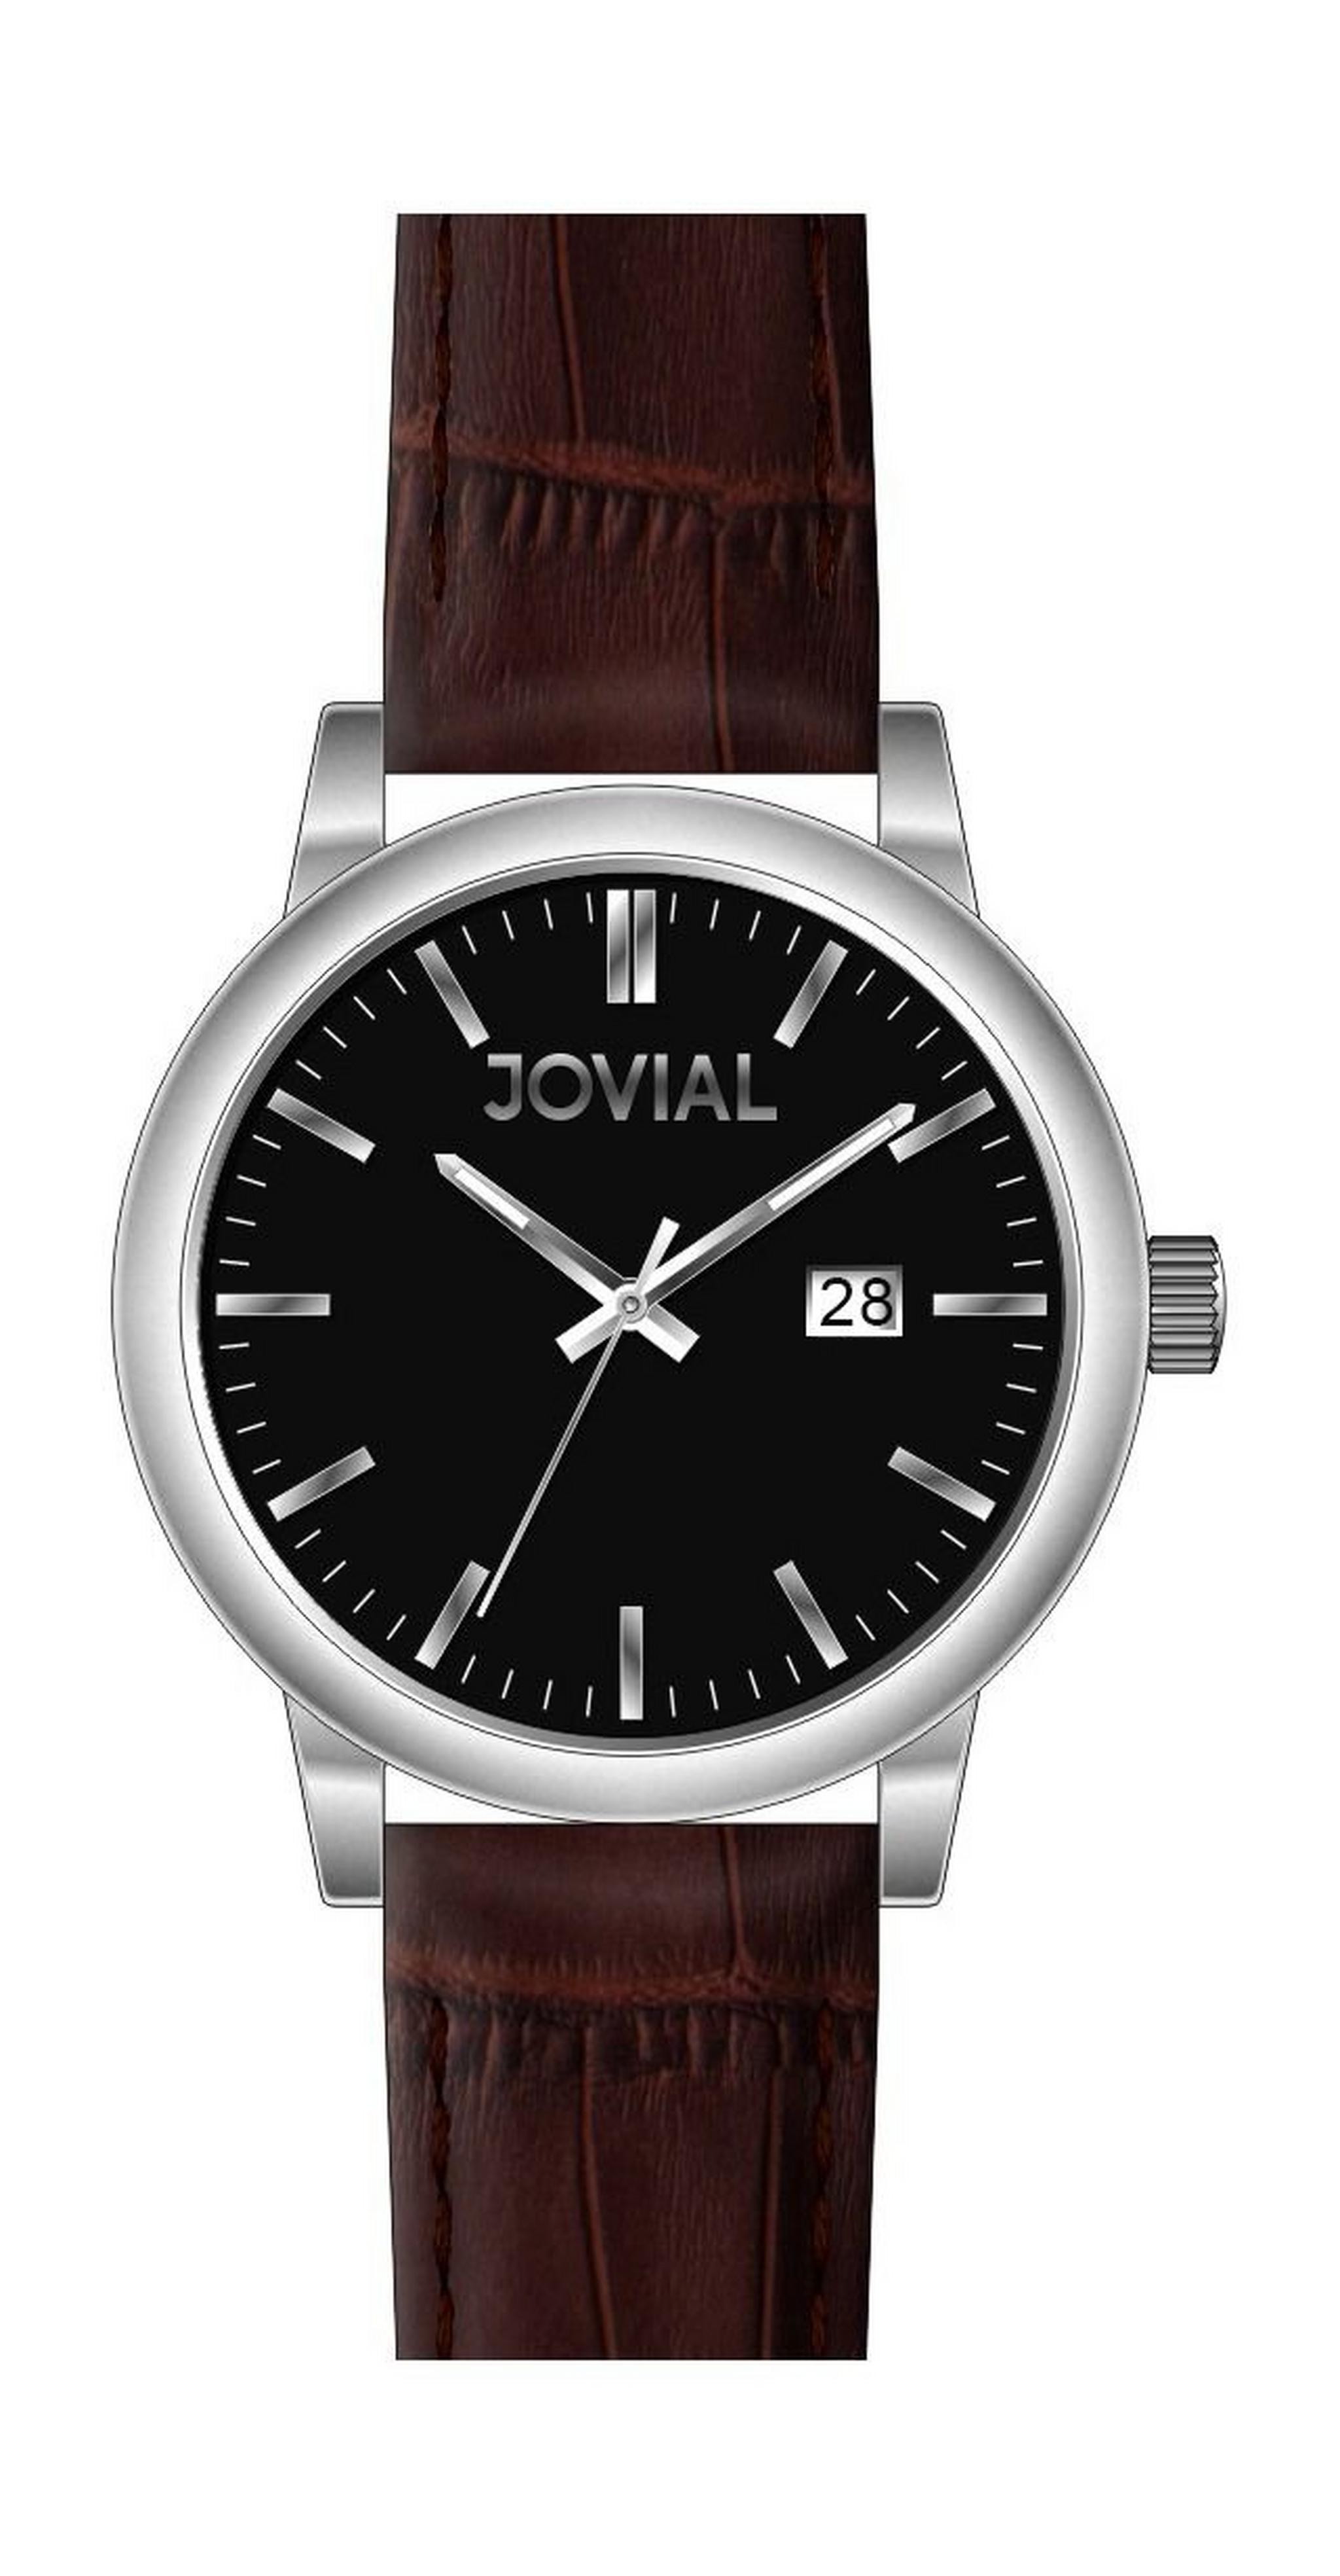 Jovial GS2009-33 Casual Analog Gents Watch – Leather Strap - Brown